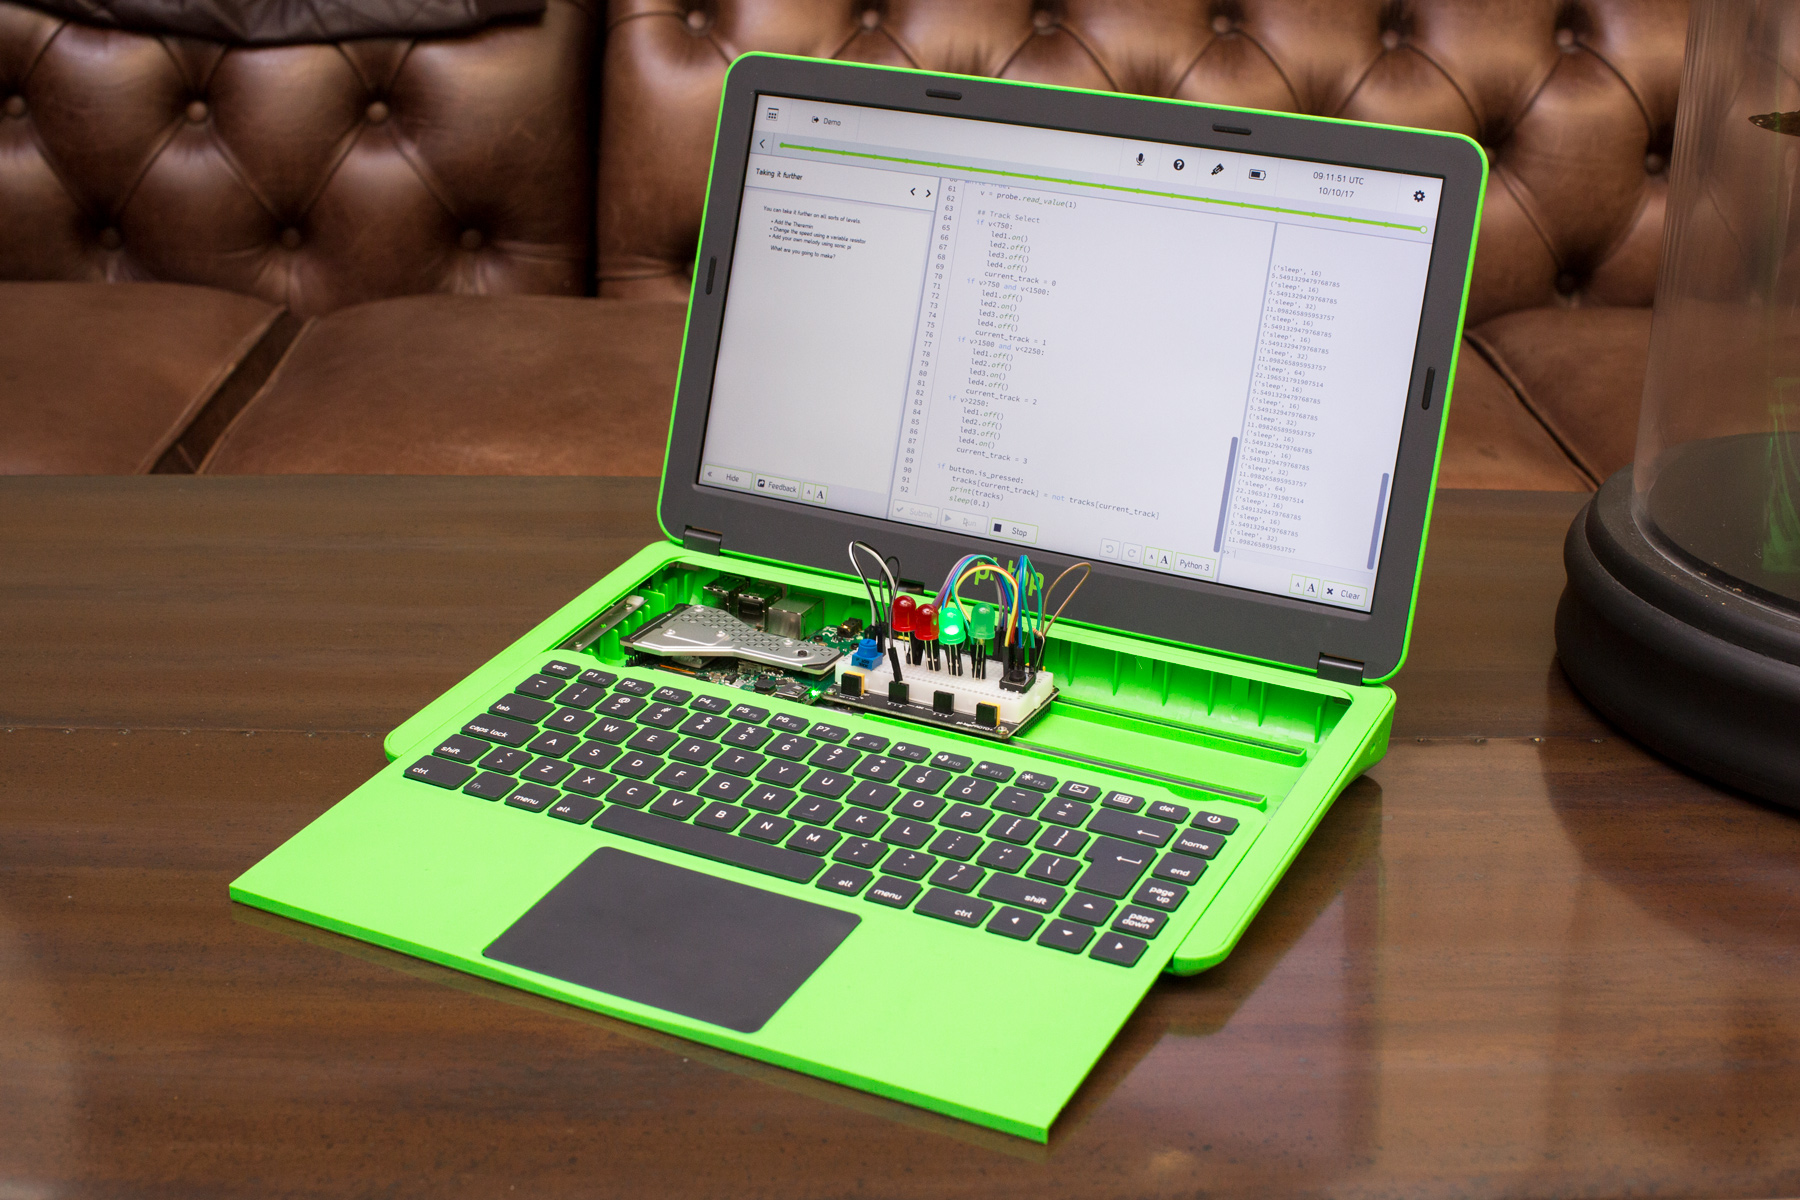 The Pi-Top is a DIY Raspberry Pi laptop to help teaching code and hardware